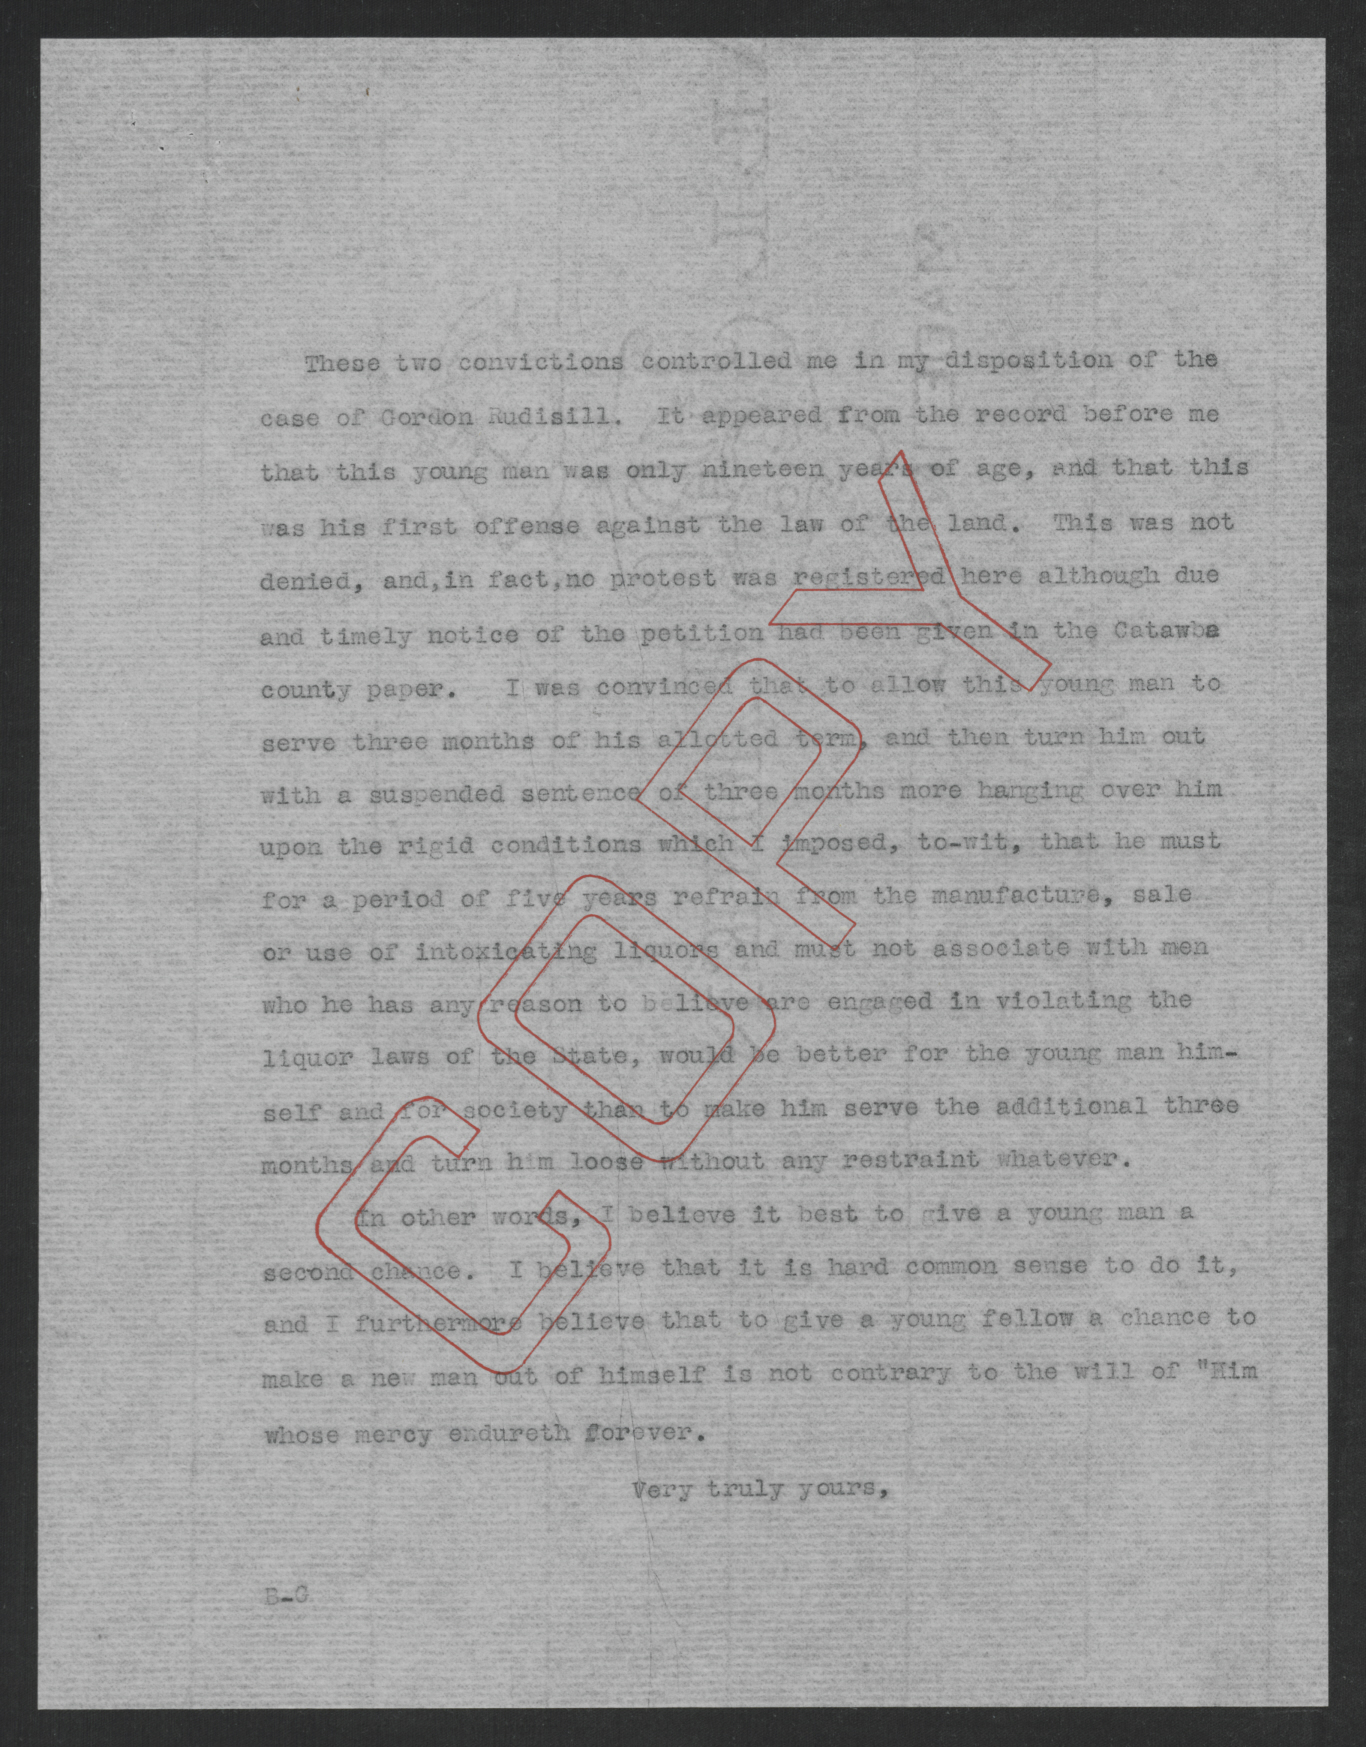 Letter from Bickett to Ewart, February 18, 1920, page 2